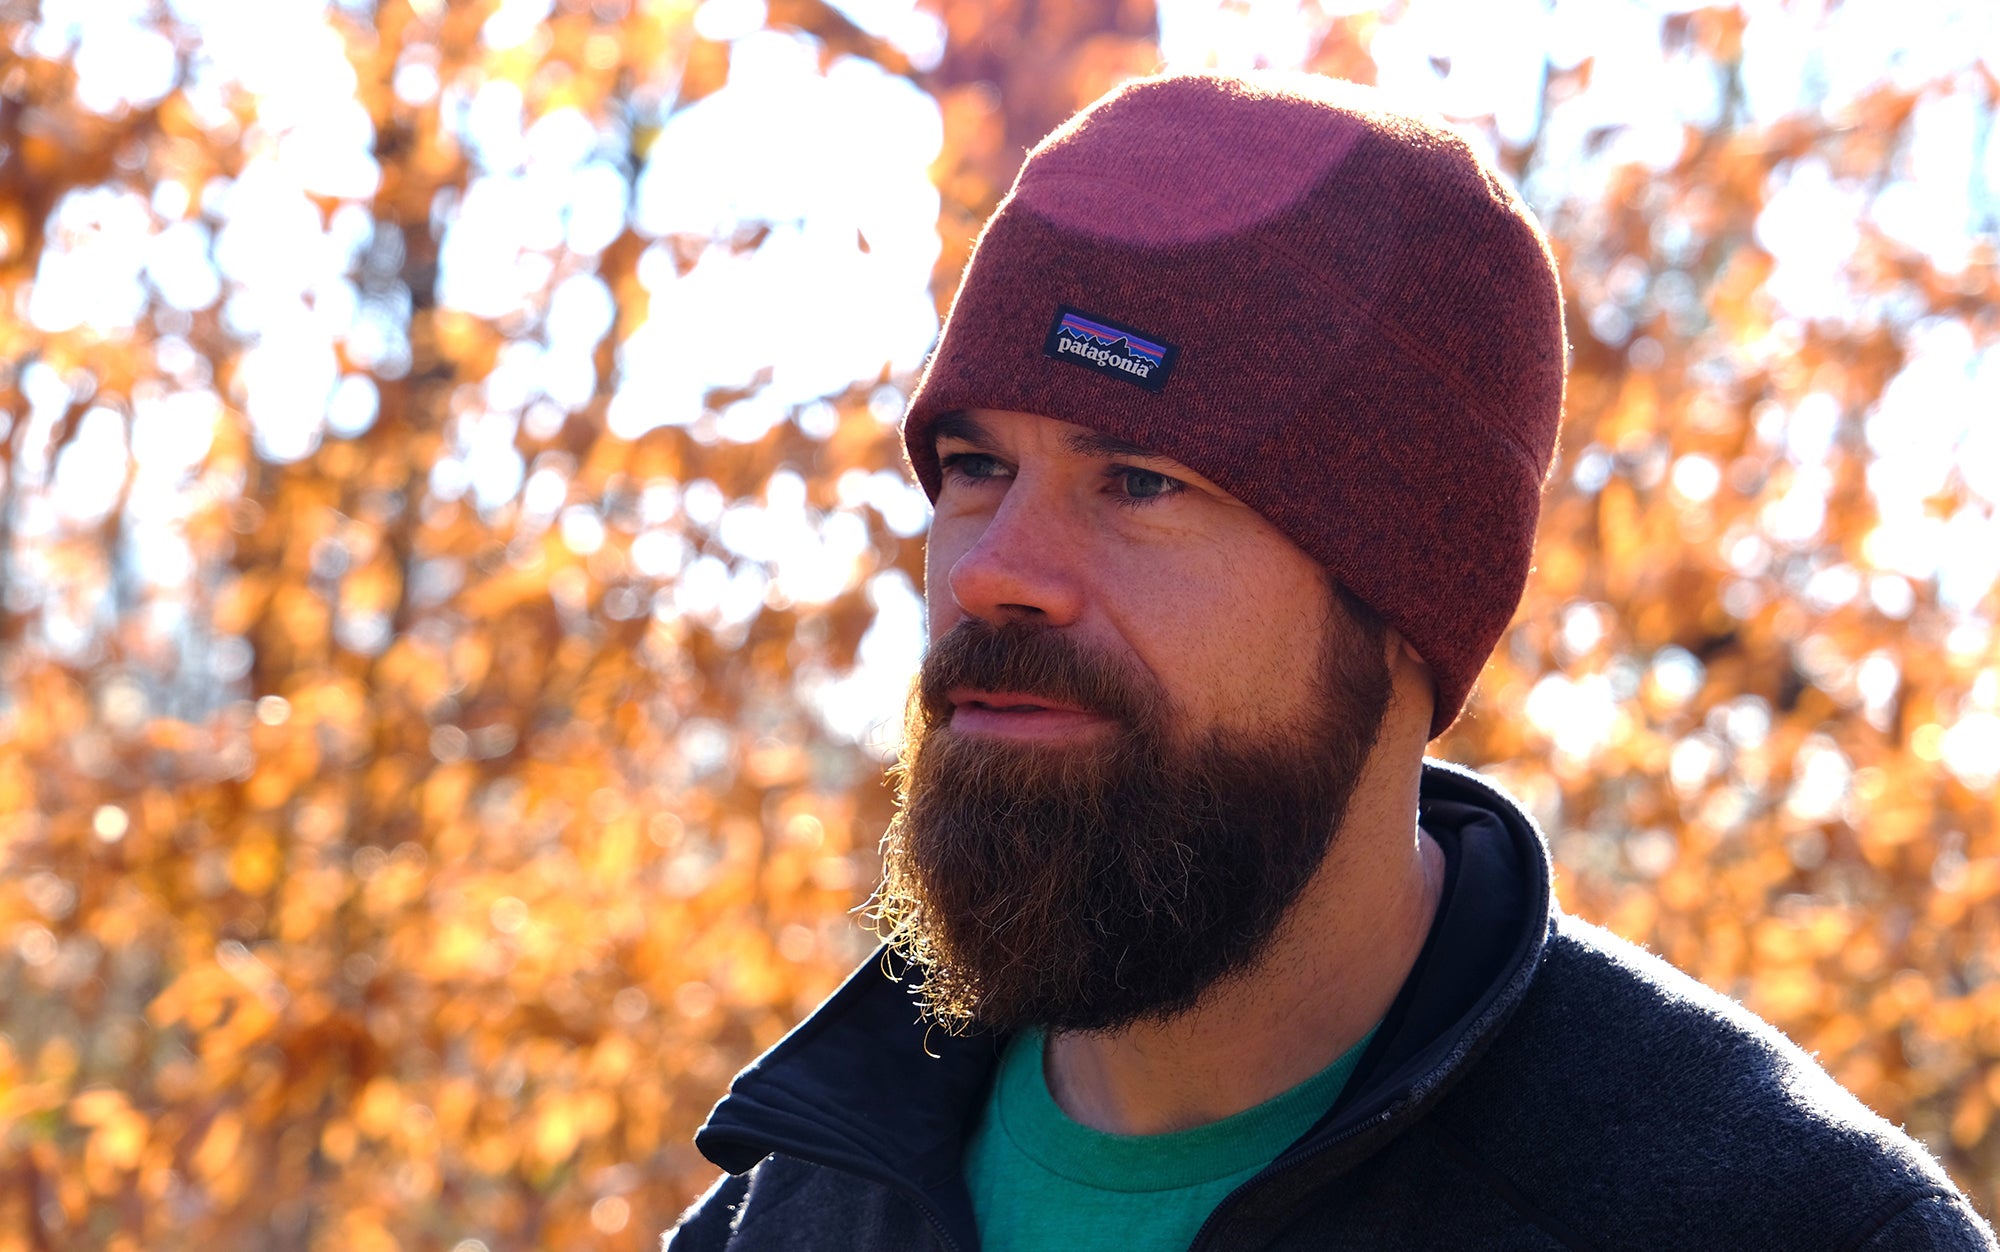 We tested the Better Sweater Fleece Beanie.